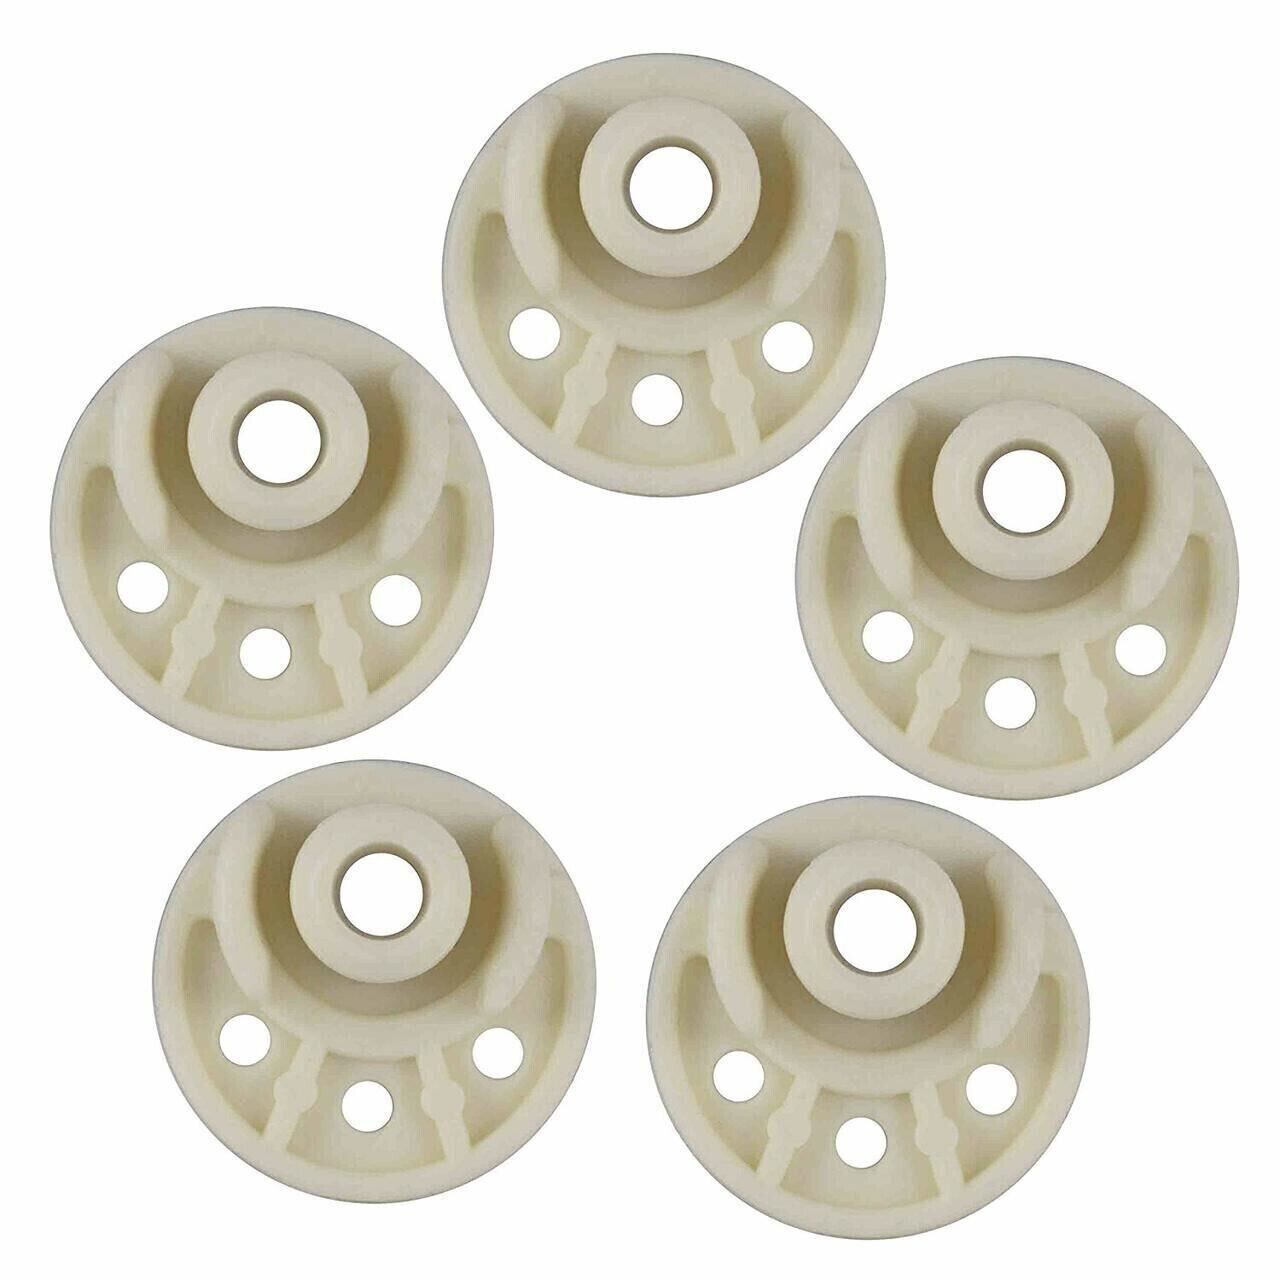 Primary image for New Stand Mixer Rubber Foot for KitchenAid 5KSM150PSBAC4 7K45SS KSM150PSOB 5pcs